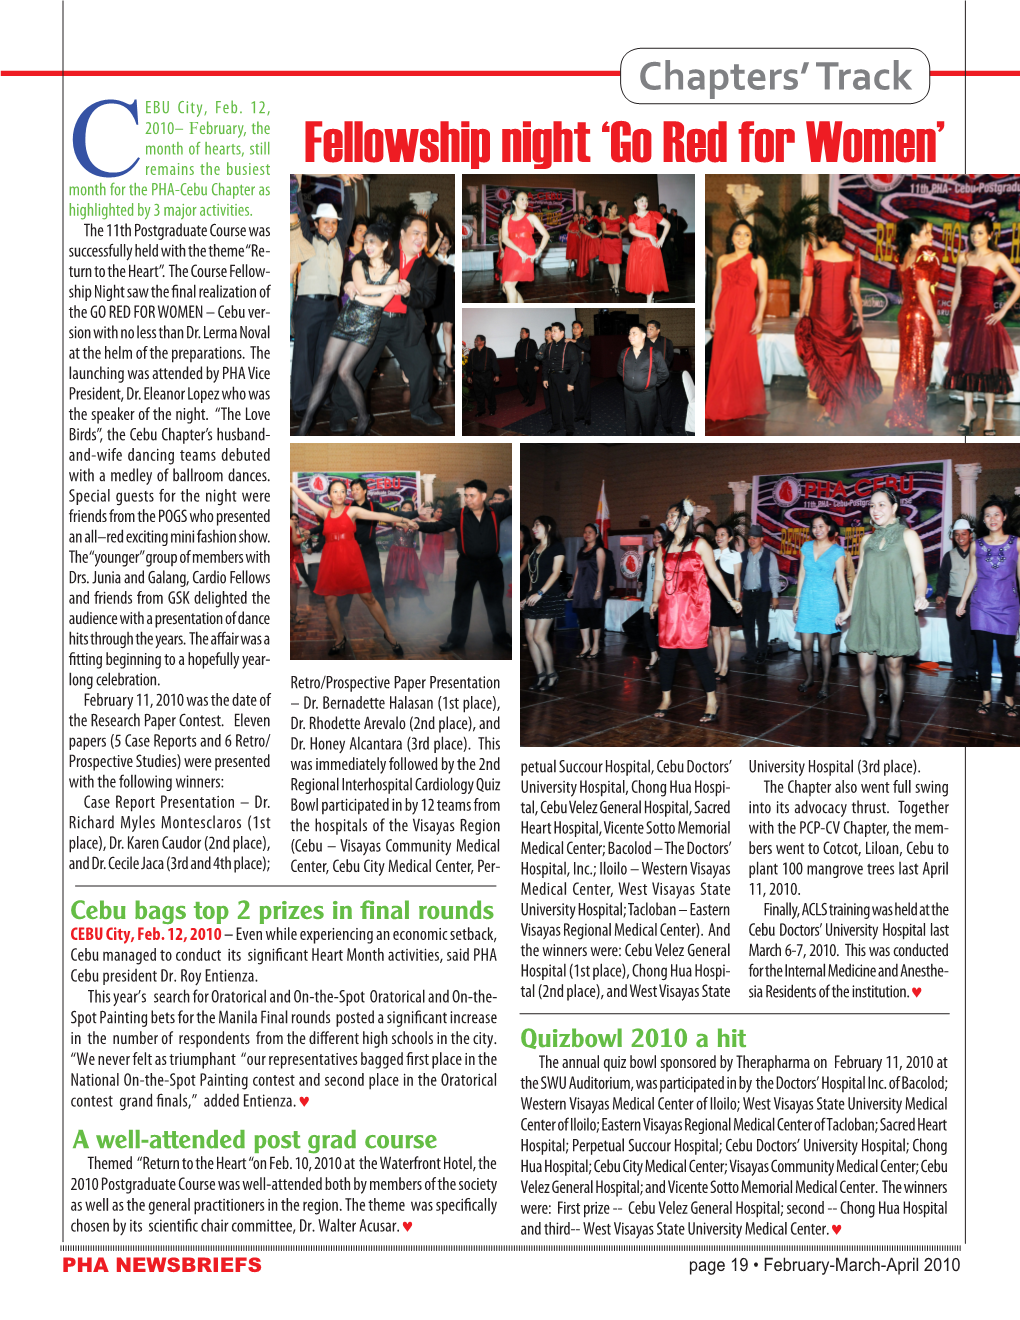 Fellowship Night ‘Go Red for Women’ Cmonth for the PHA-Cebu Chapter As Highlighted by 3 Major Activities